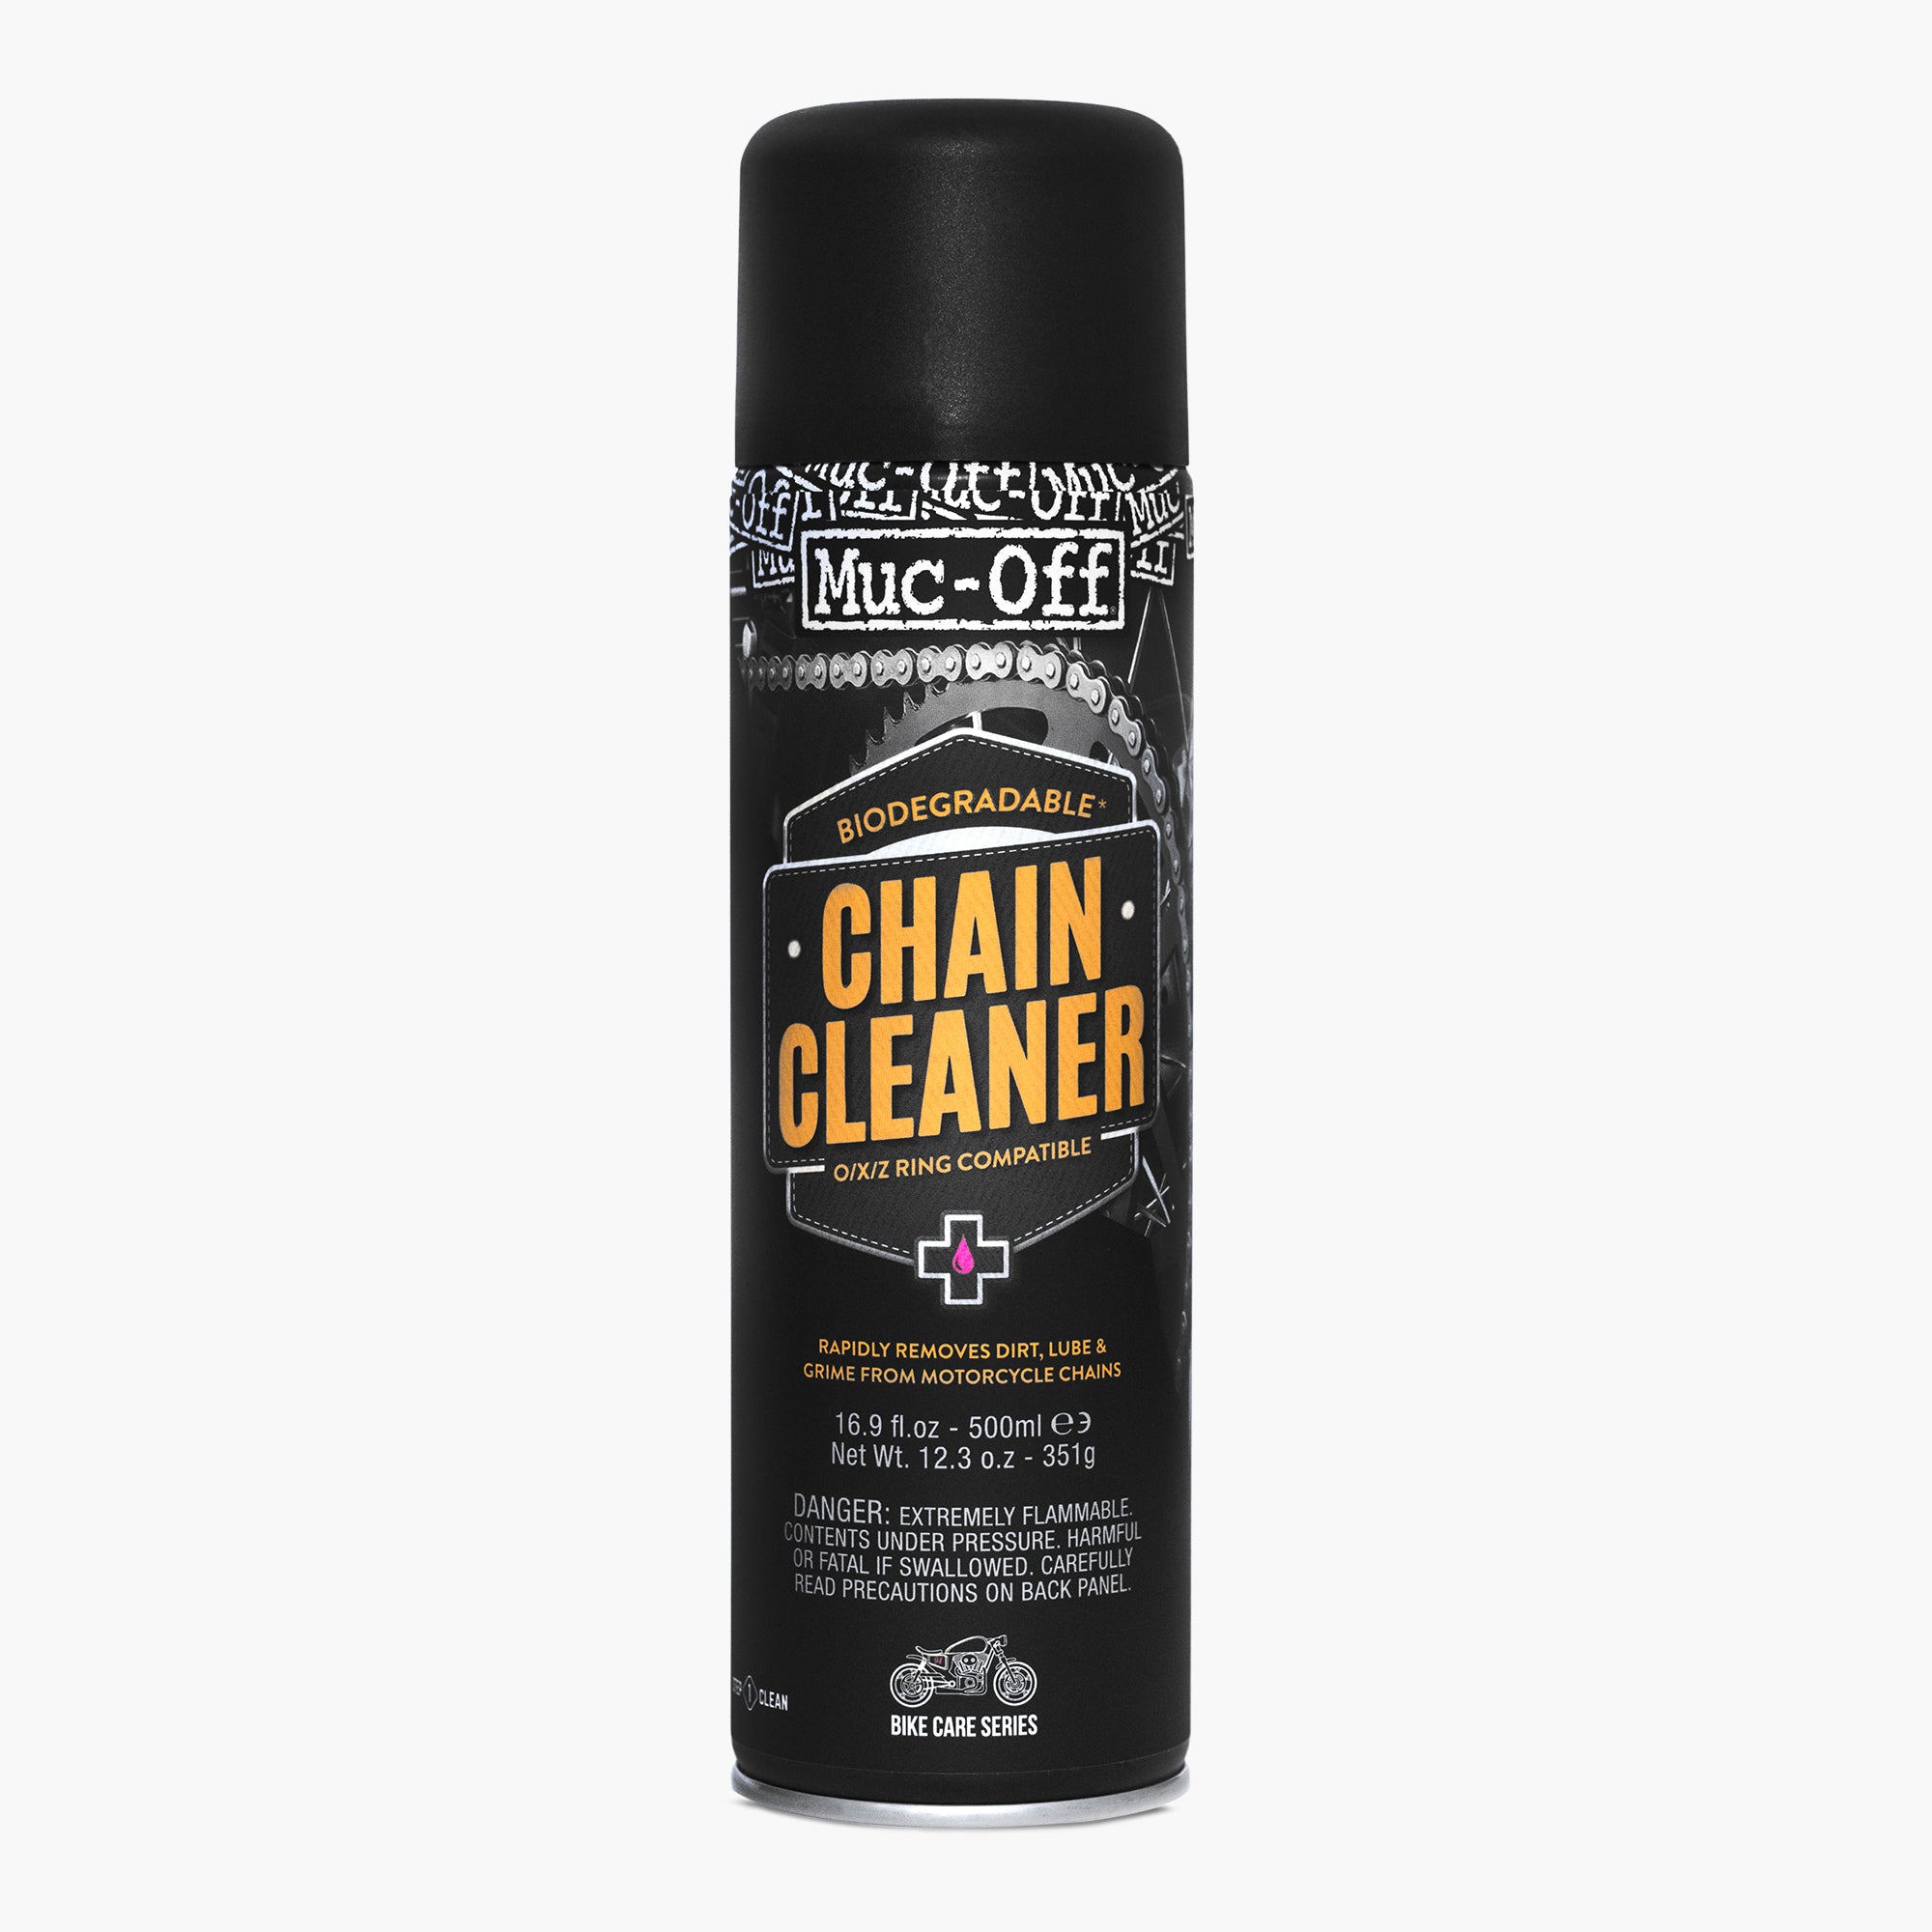 MUC OFF - Bicycle chain cleaners